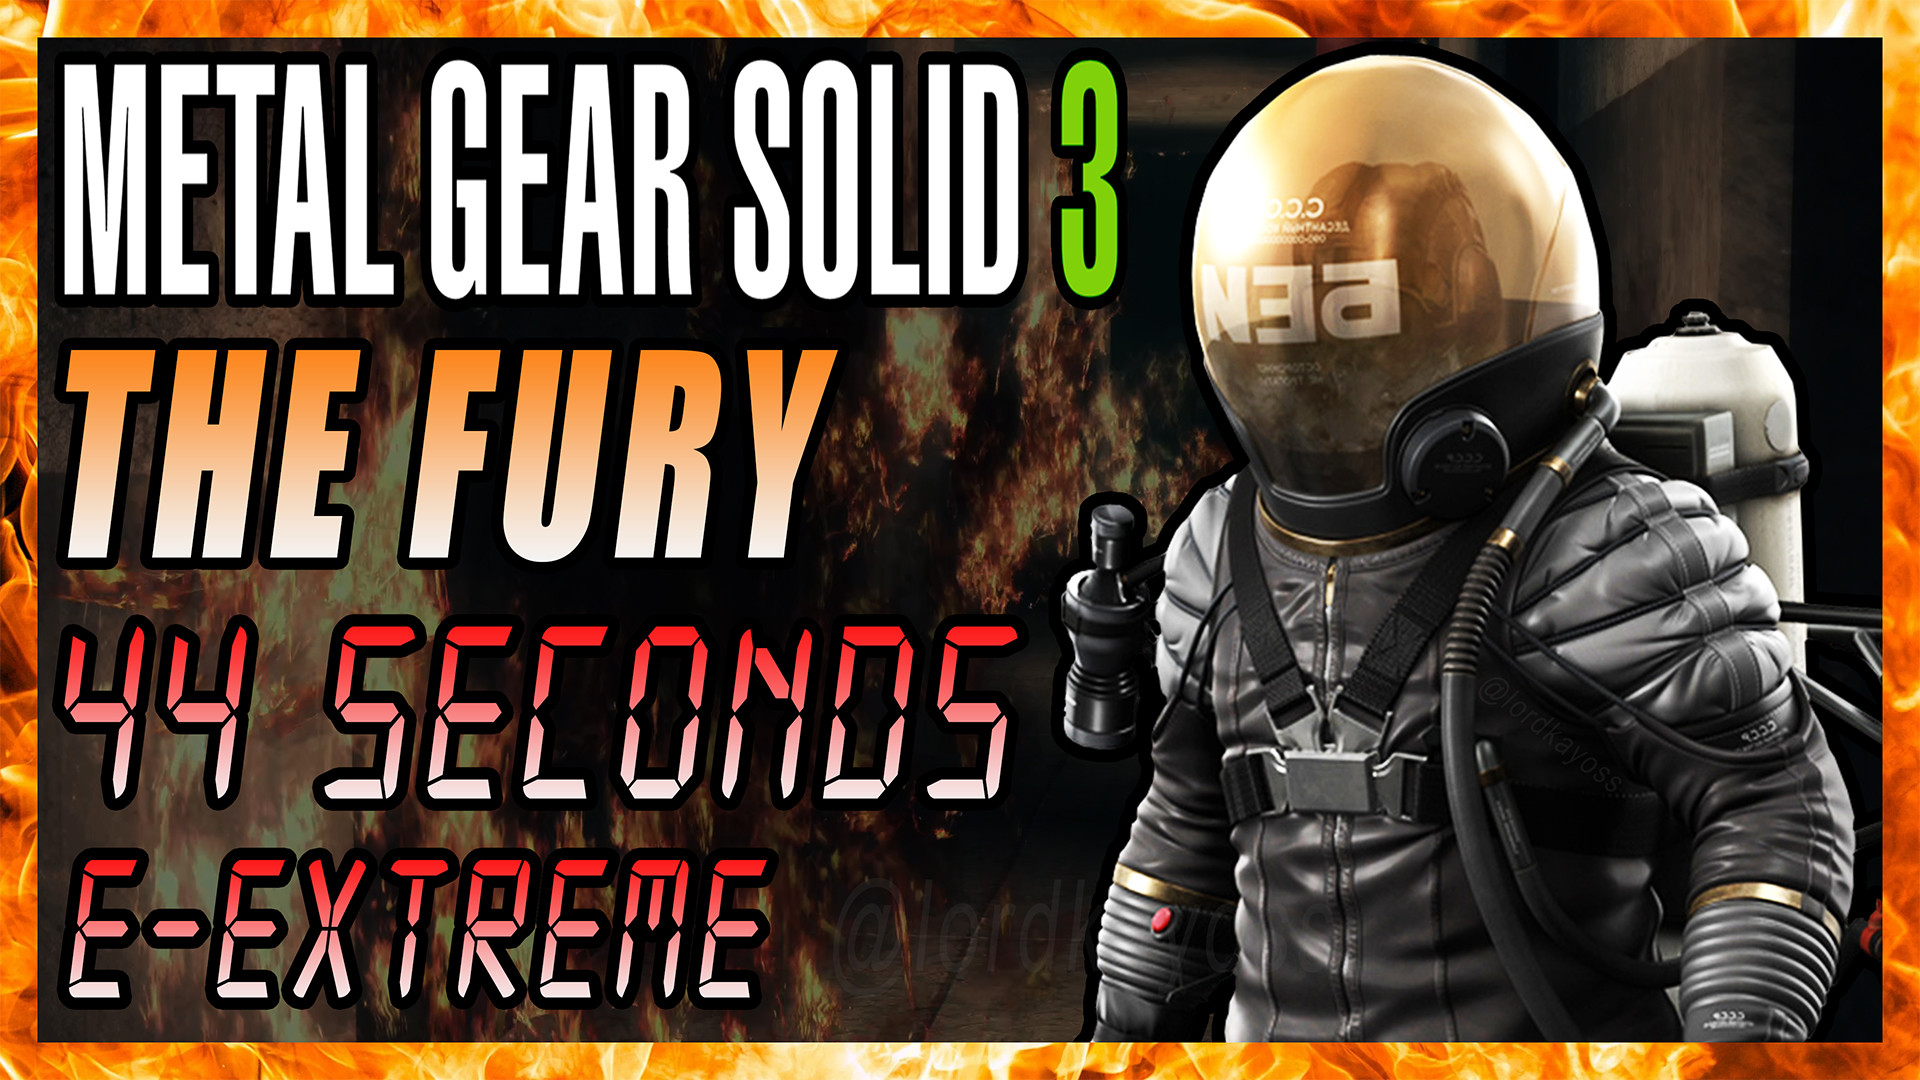 mgs3-the-fury-e-european-extreme-master-collection-snake-eater-44-seconds-lord-kayoss